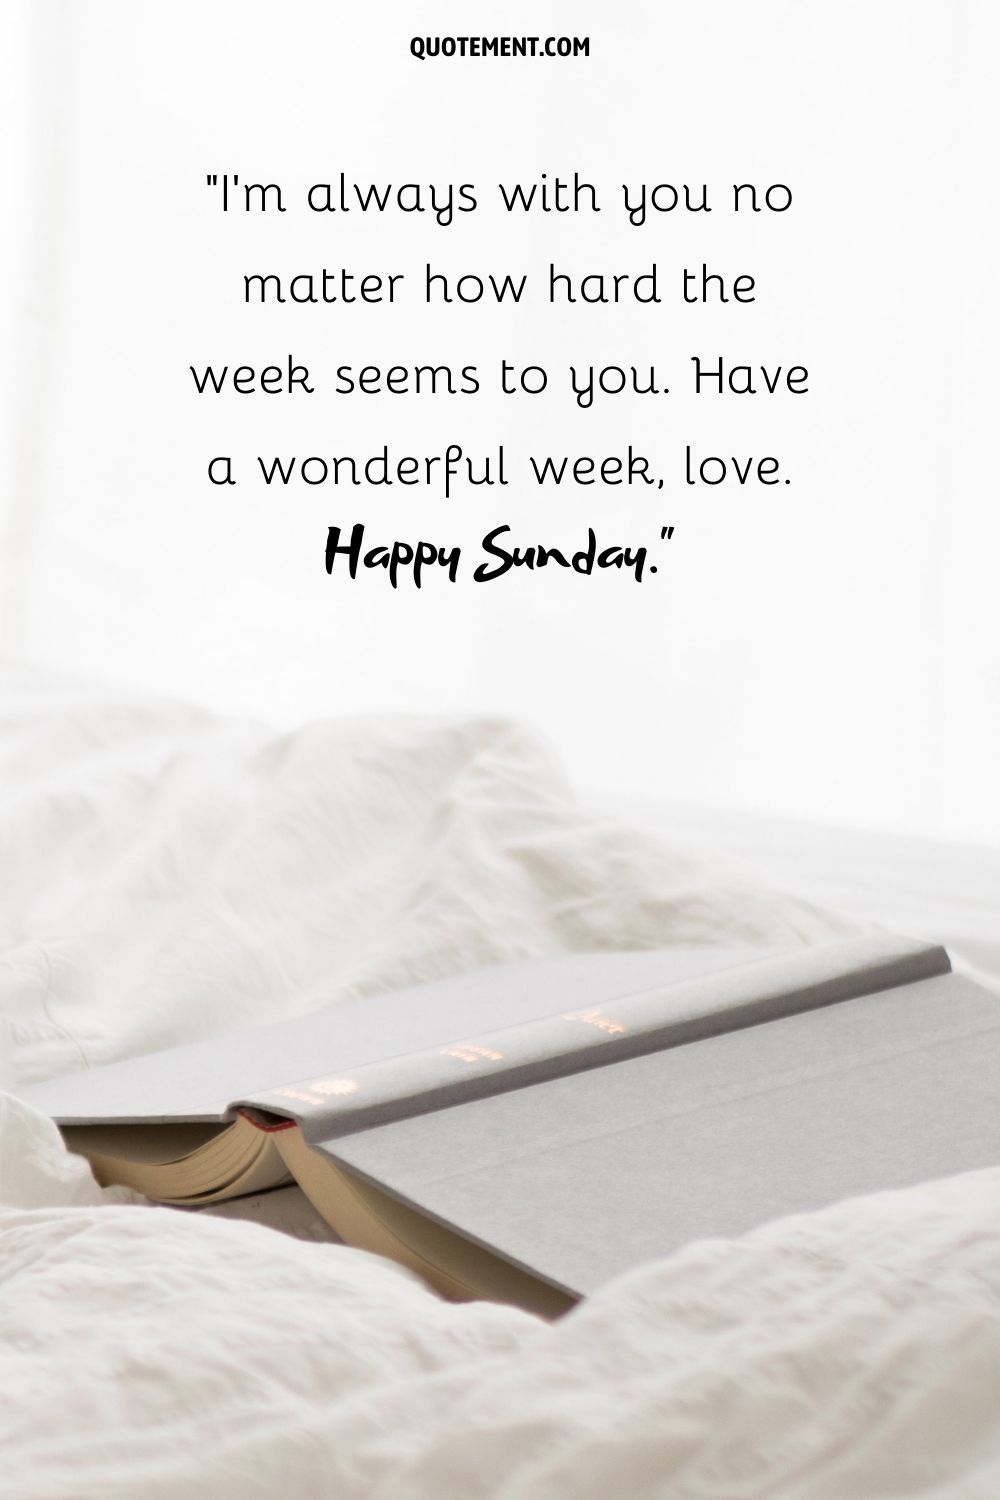 book resting on bed representing good morning beautiful happy sunday wish